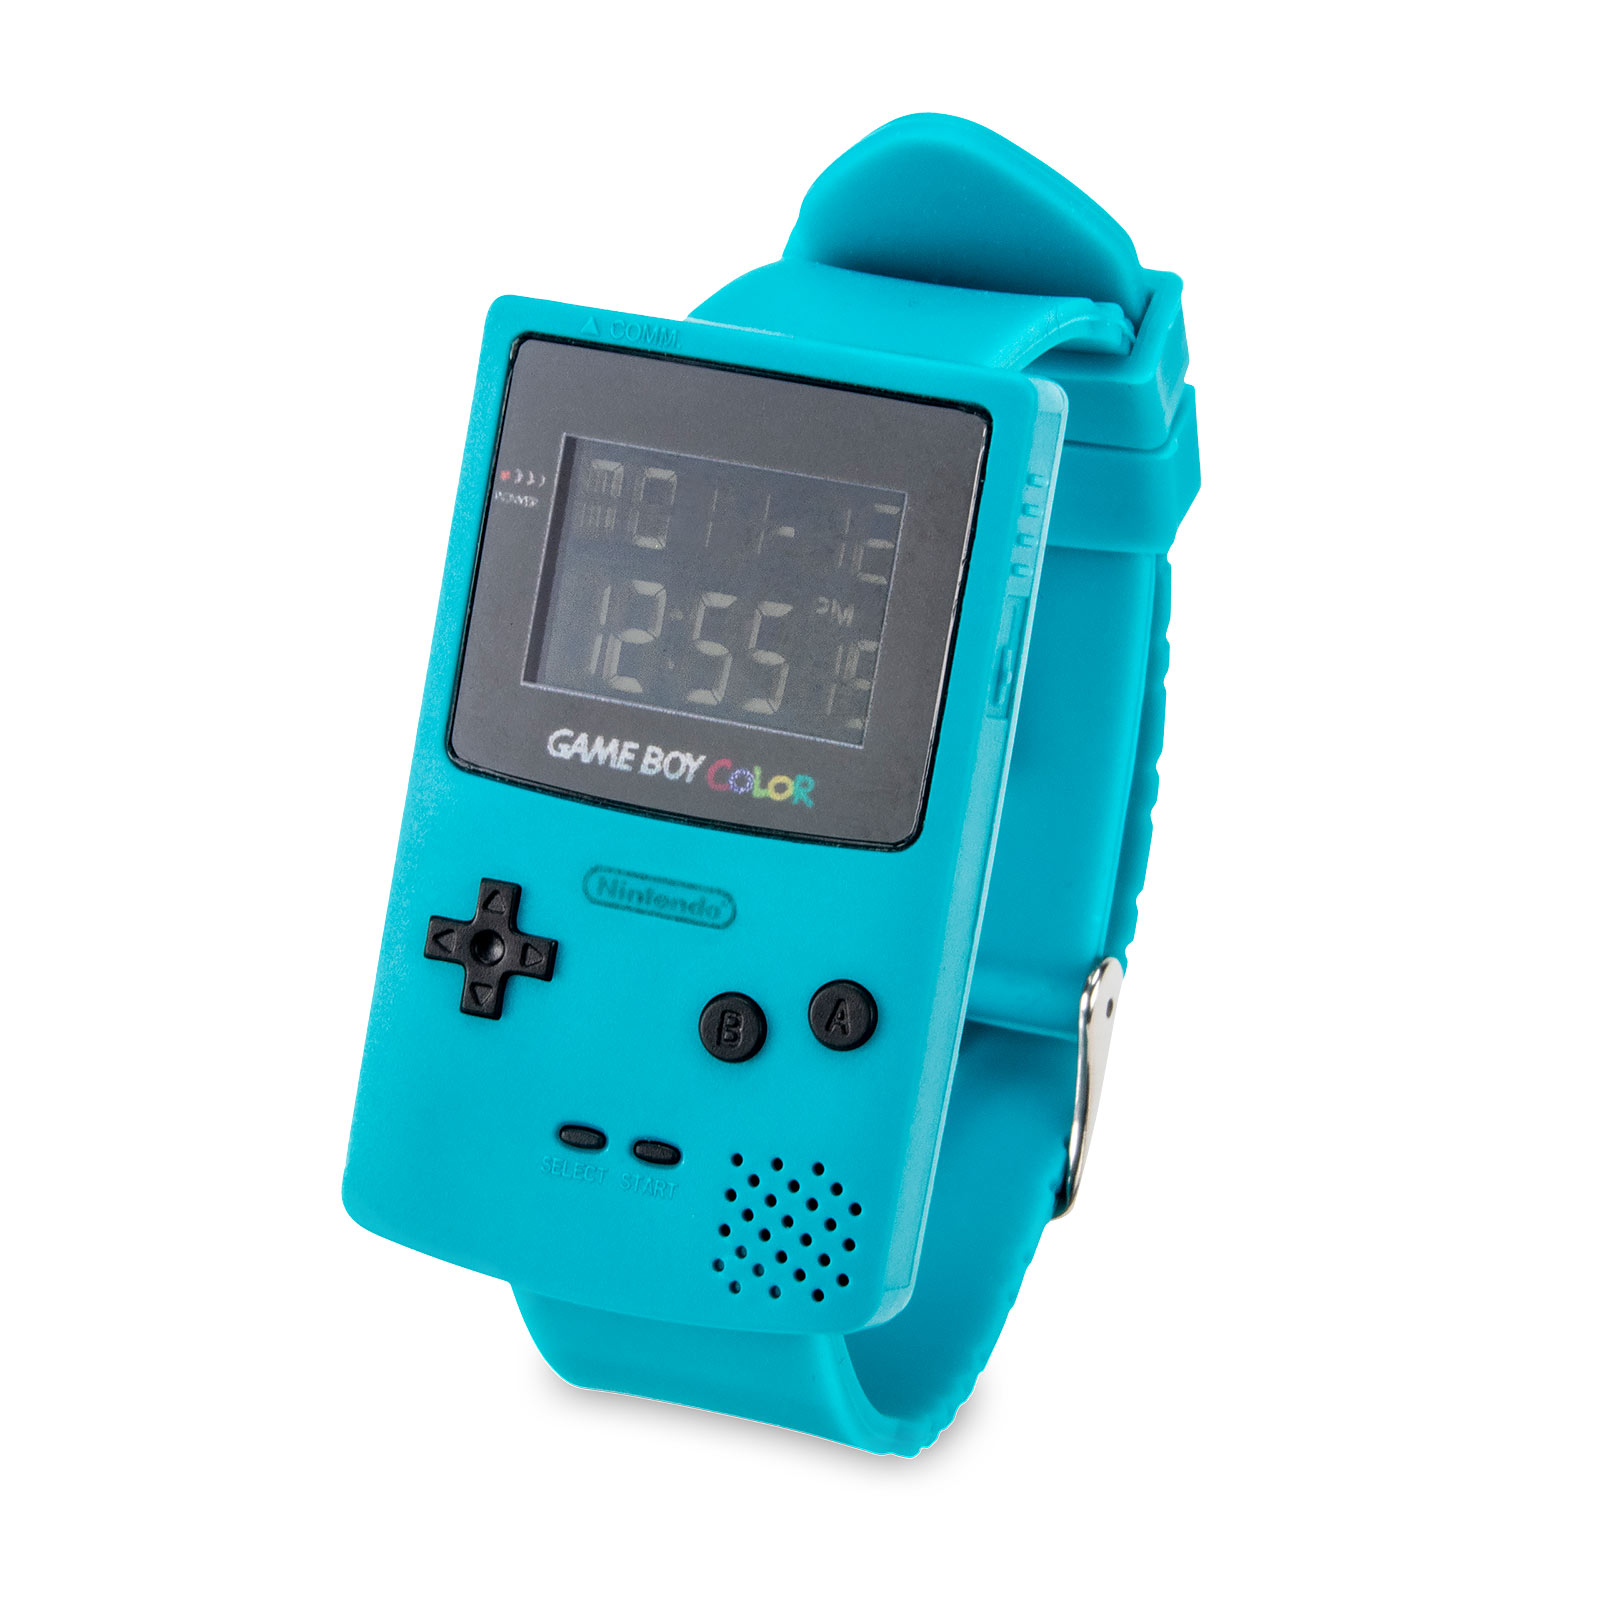 Nintendo - Game Boy Color wristwatch with alarm function